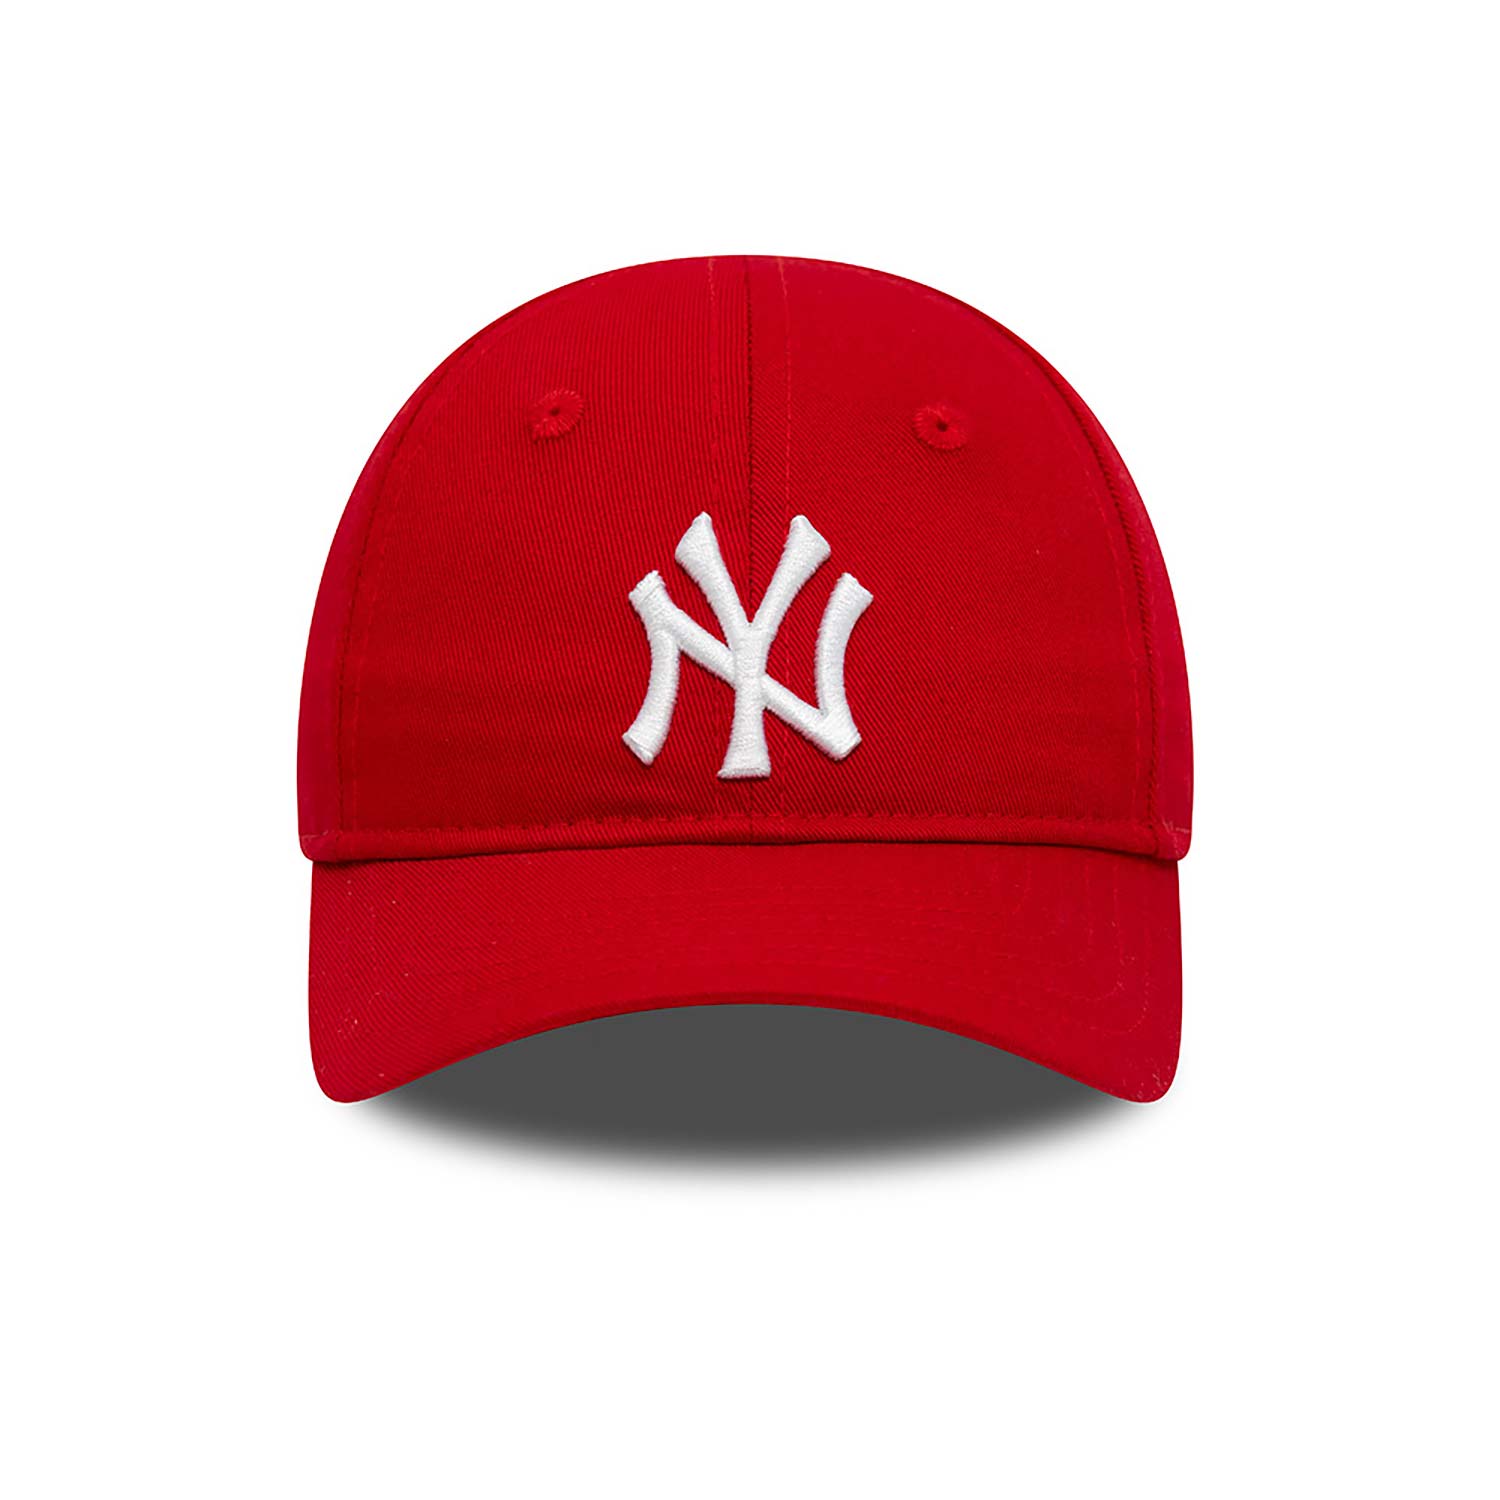 New York Yankees Infant League Essential Red 9FORTY Cap